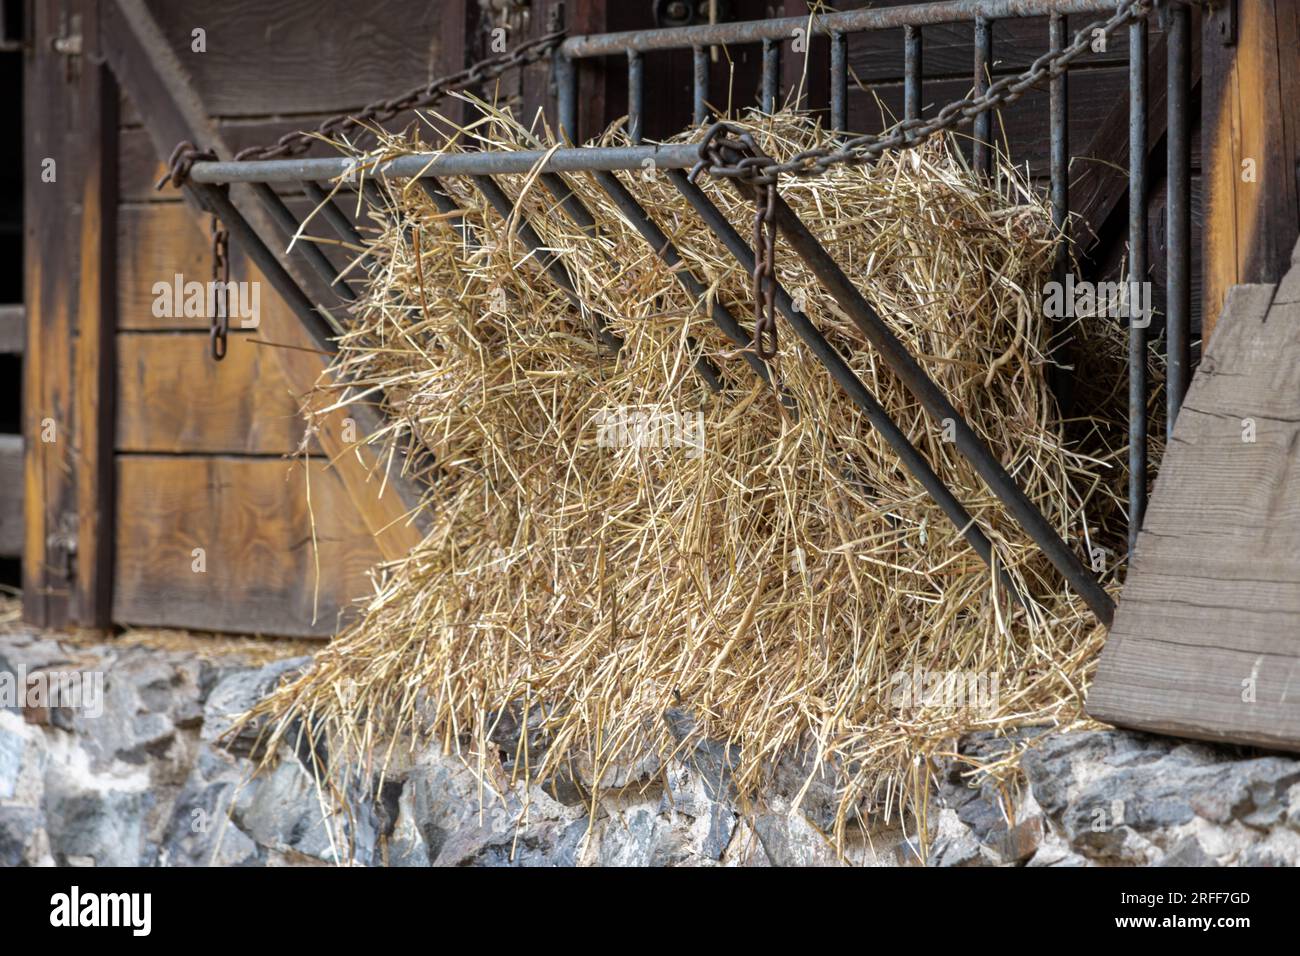 A hay manger full of hay on a wall of cowshed Stock Photo